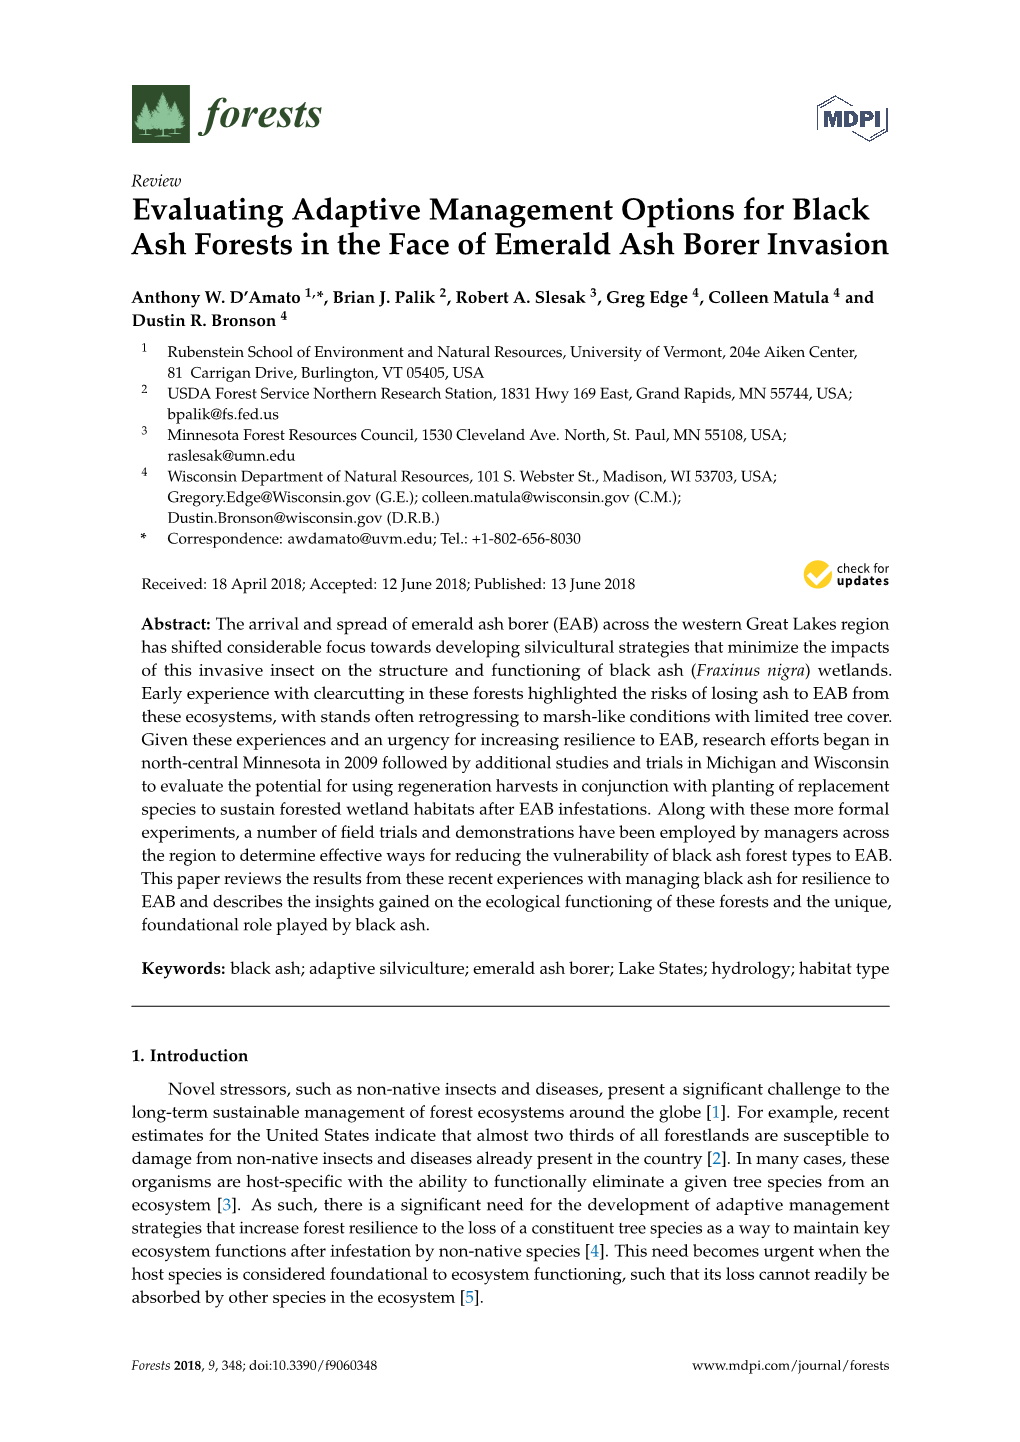 Evaluating Adaptive Management Options for Black Ash Forests in the Face of Emerald Ash Borer Invasion